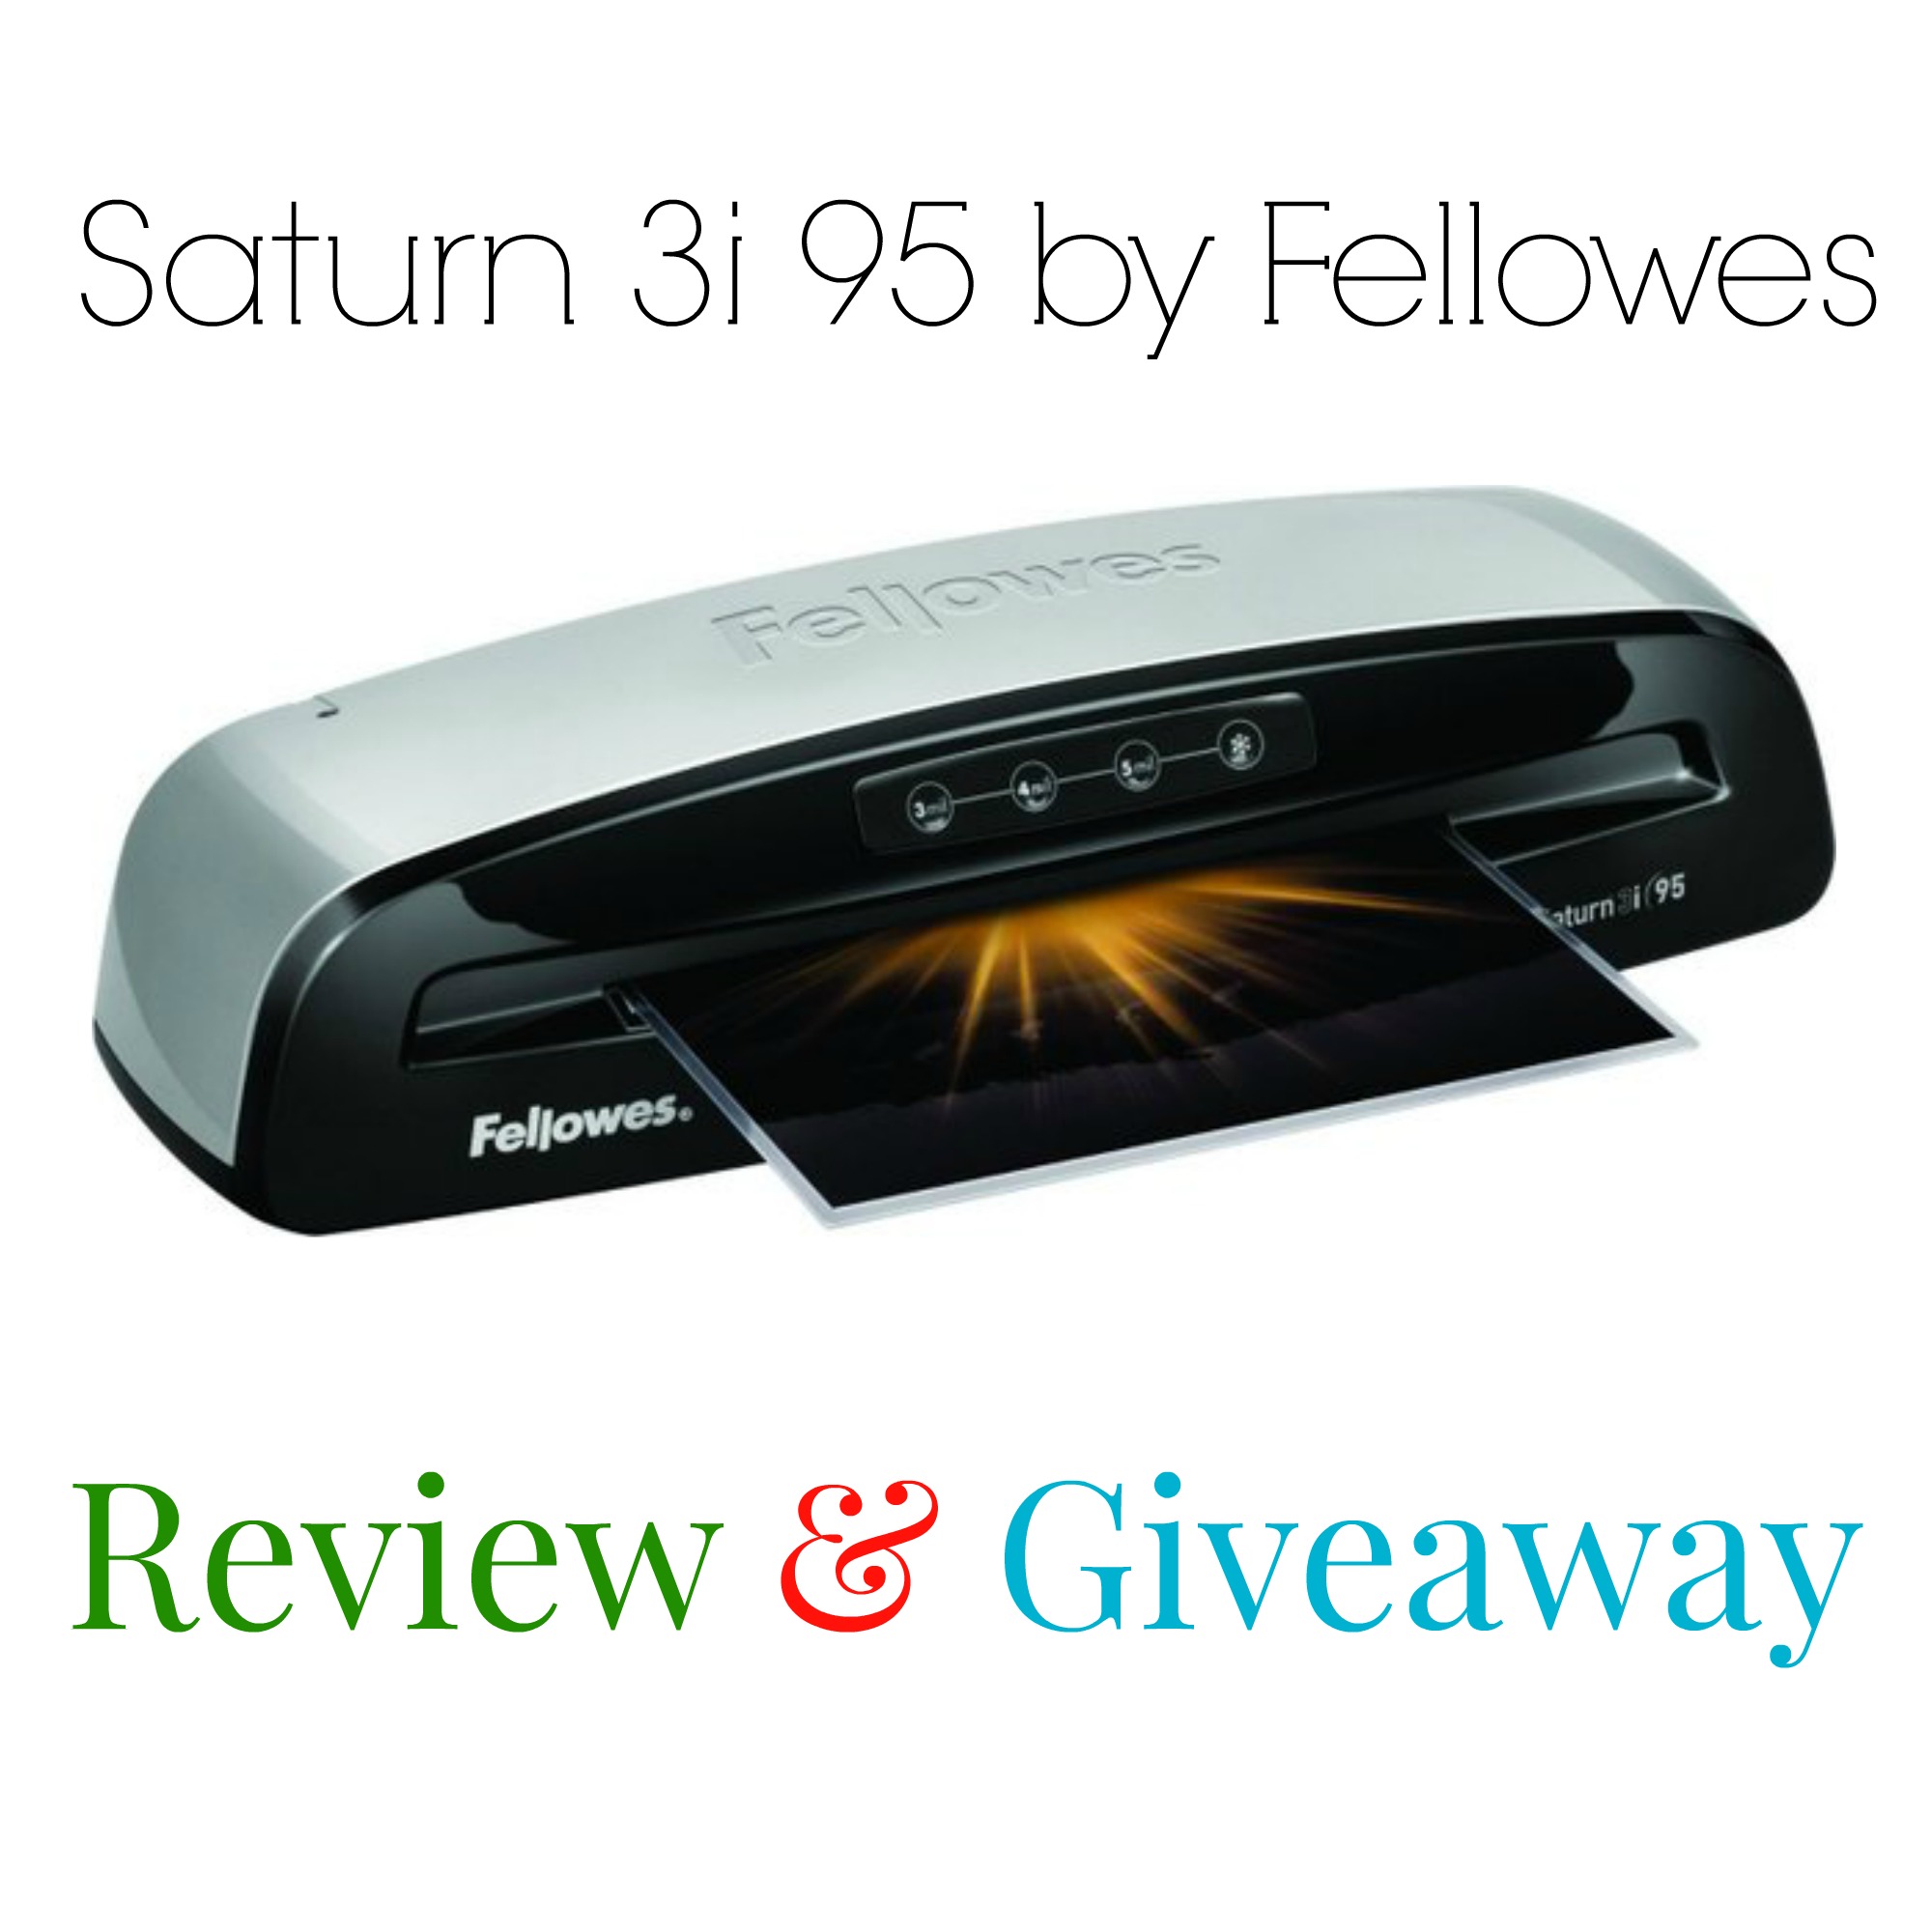 Fellowes Saturn 3i 95 Laminator {Review & Giveaway}